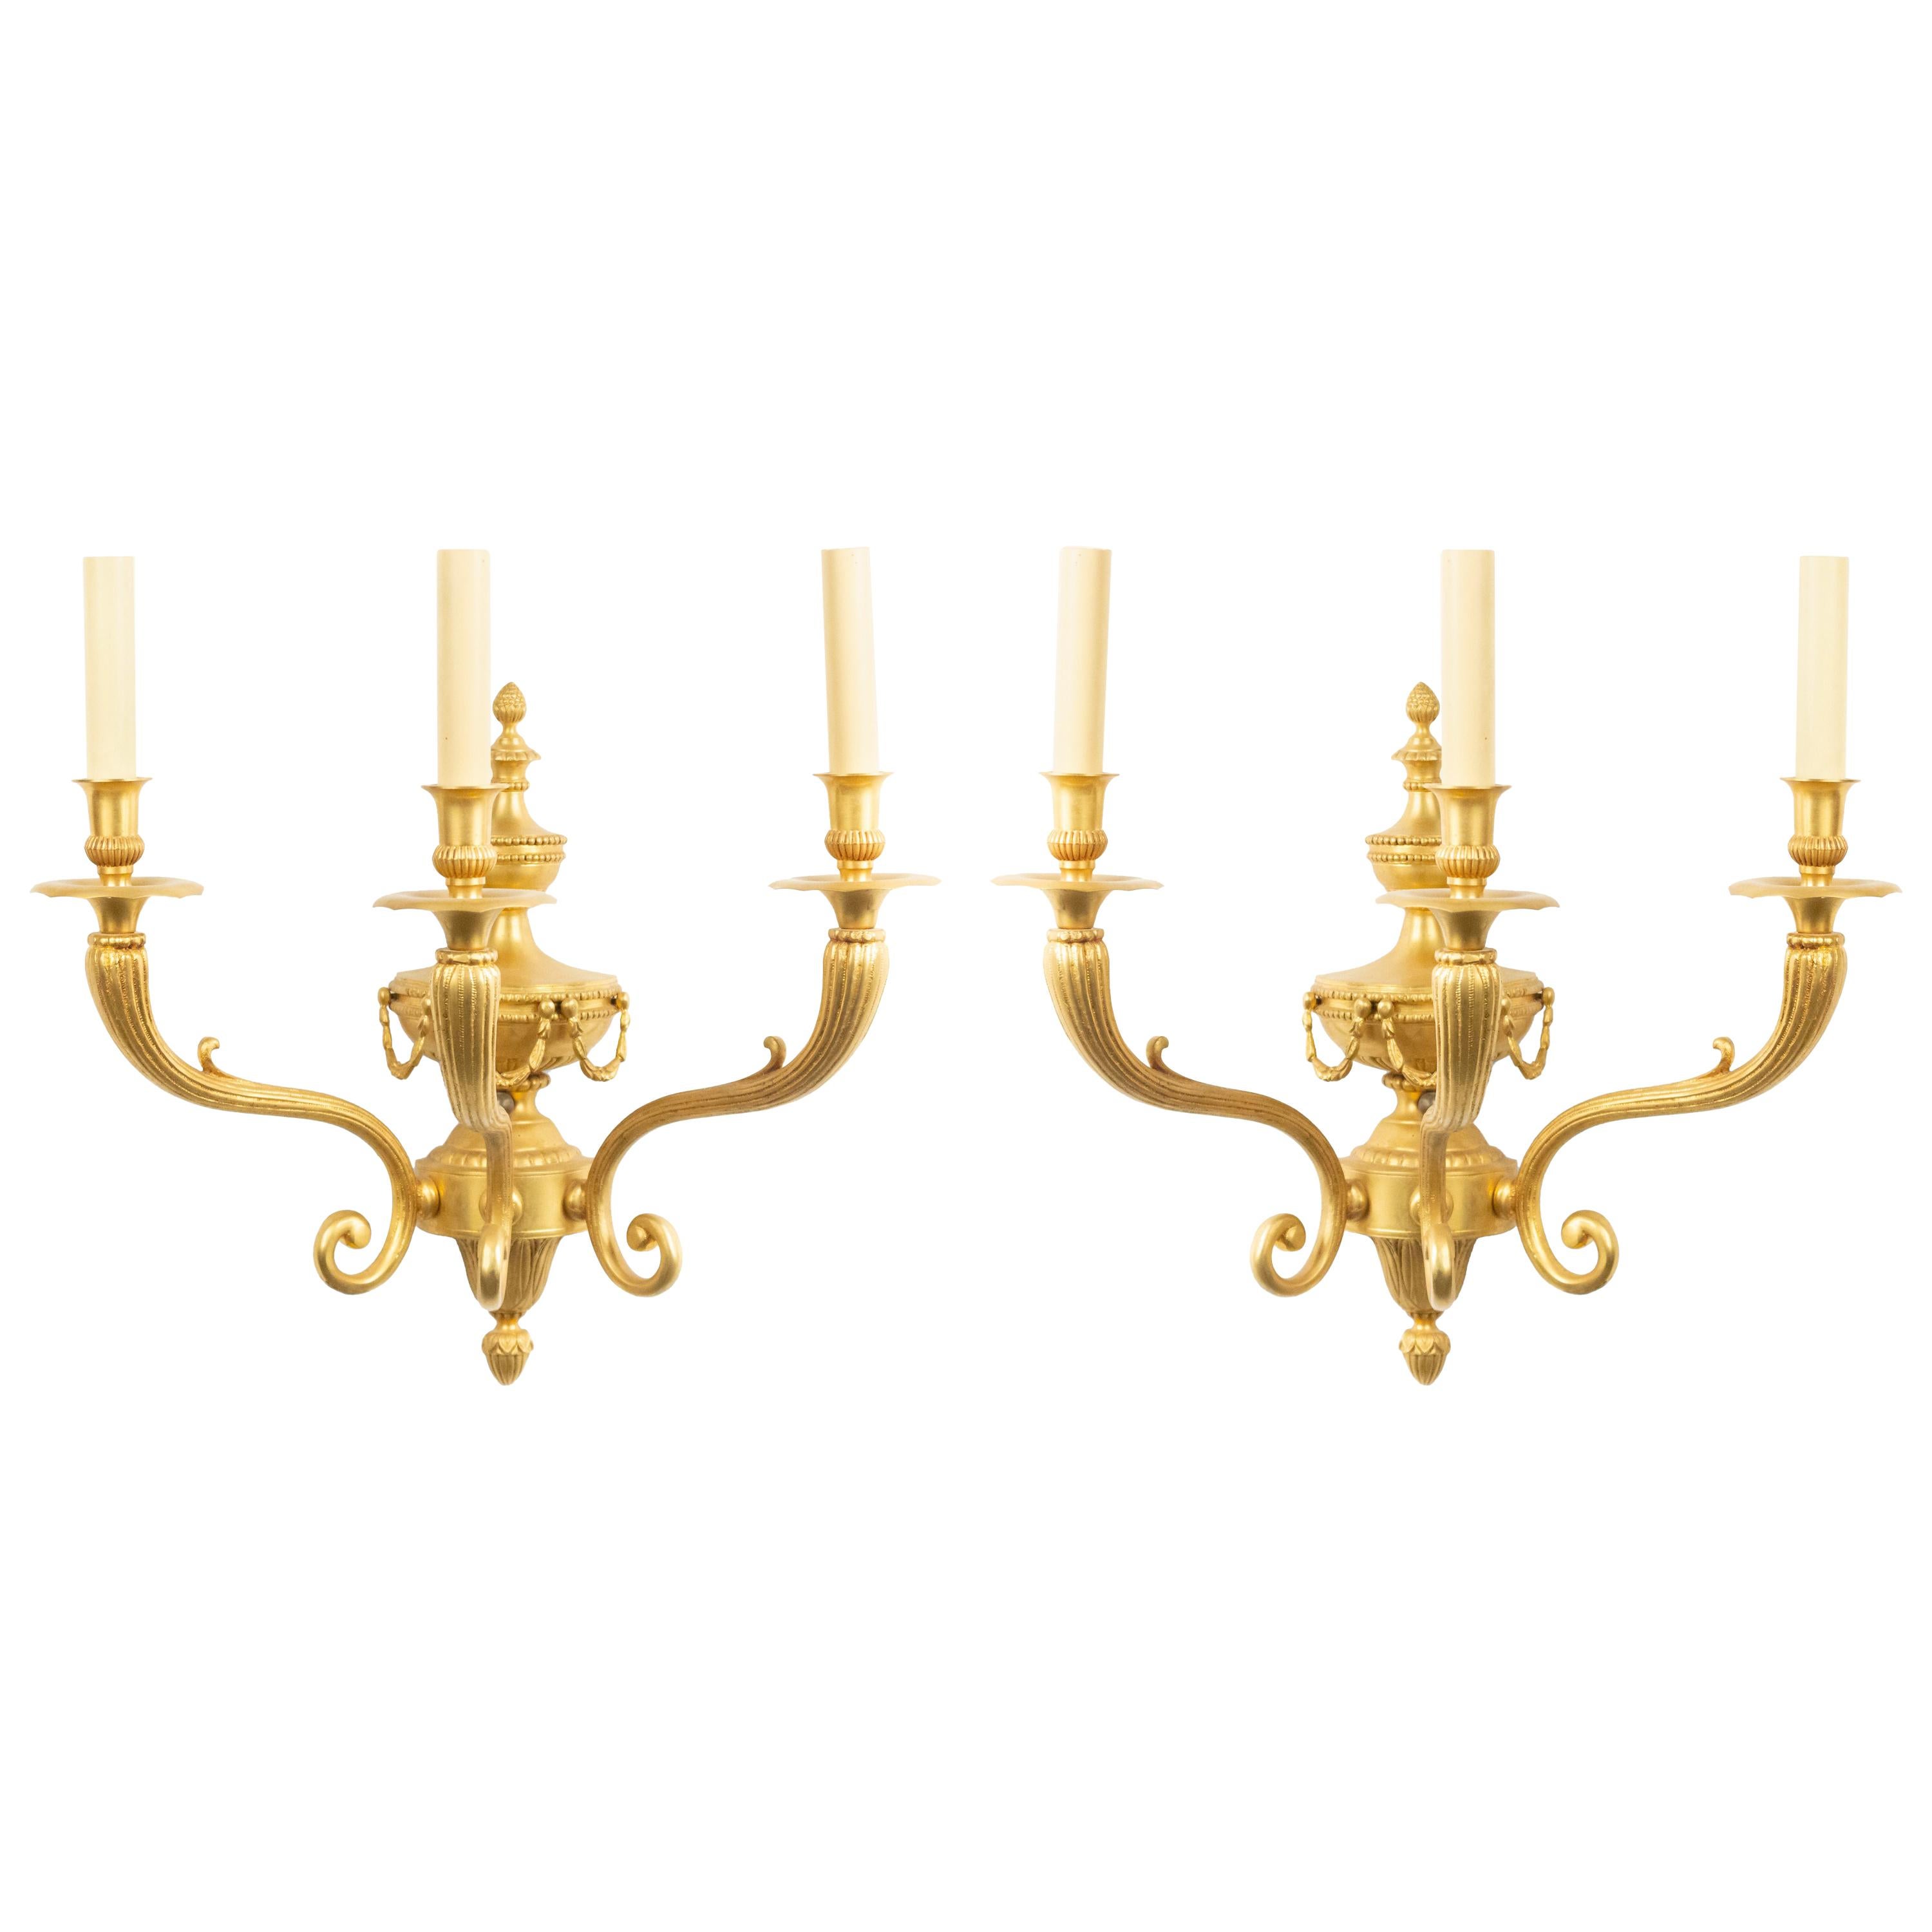 Pair of English Adam style 20th century bronze dore wall sconces with 3 fluted scroll arms, urn, and festoon design center.